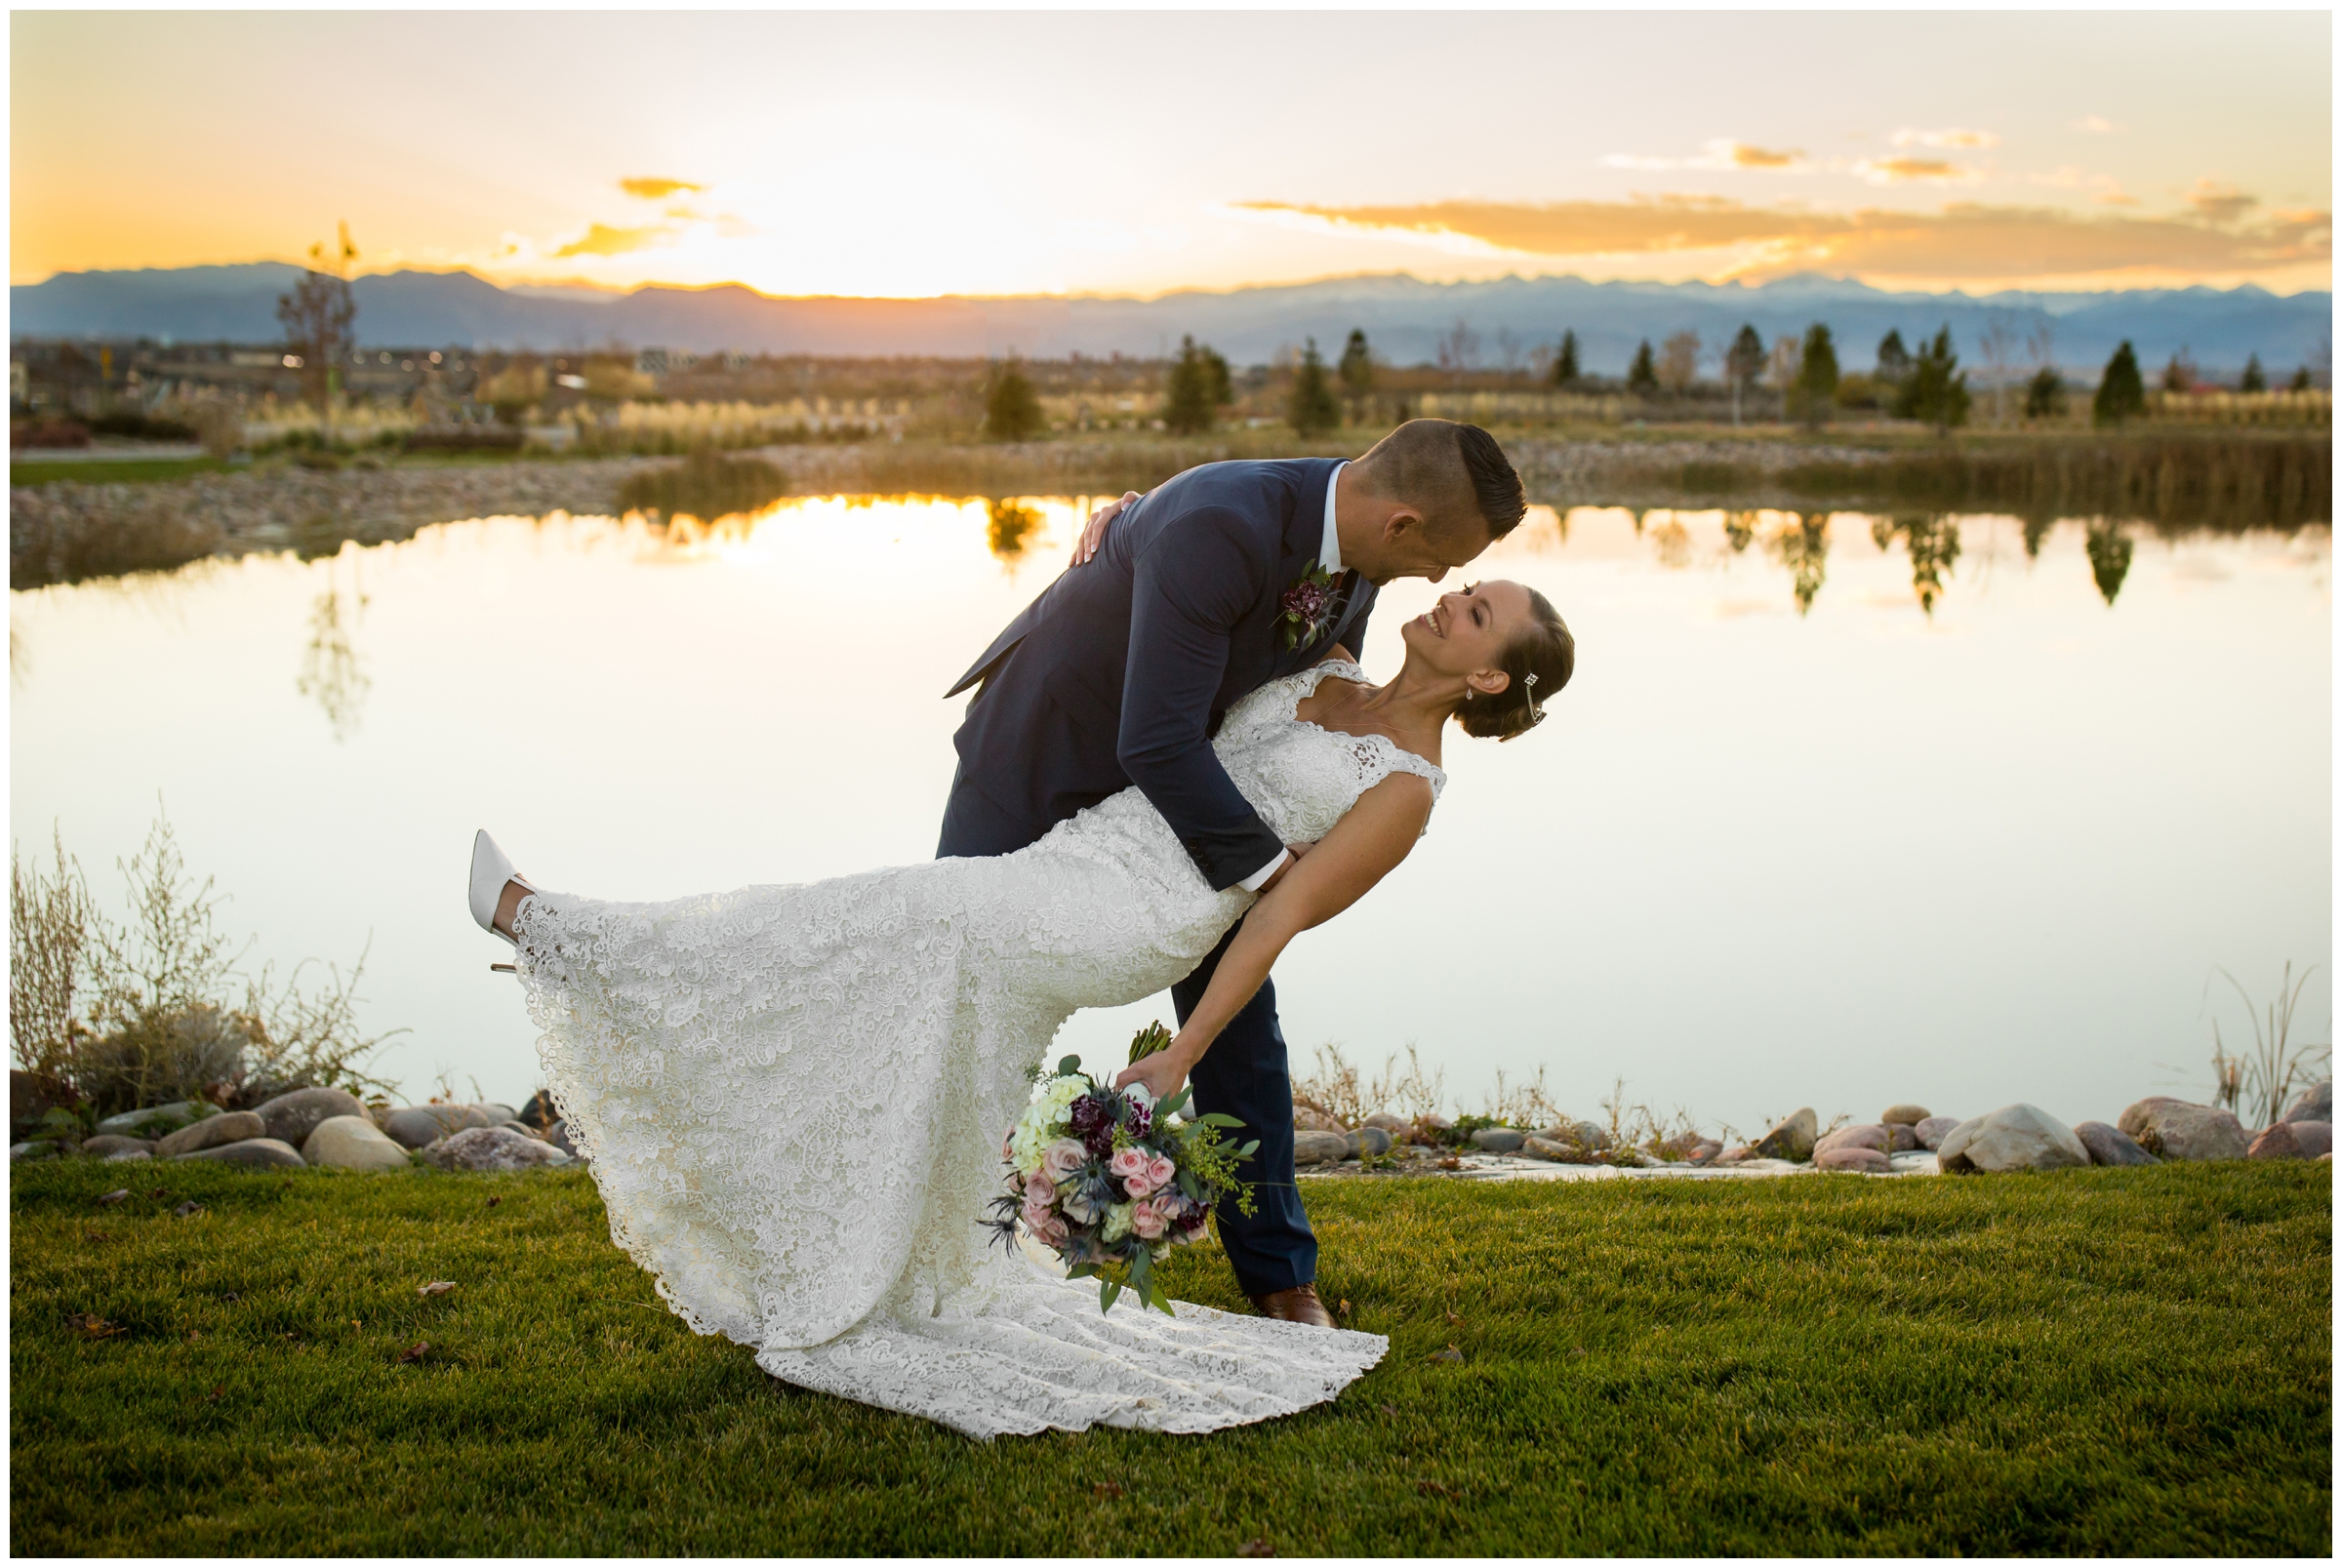 Erie Colorado wedding photos at Colliers Hill Amenity Center by photographer Plum Pretty Photography. Intimate family-only wedding inspiration in CO.